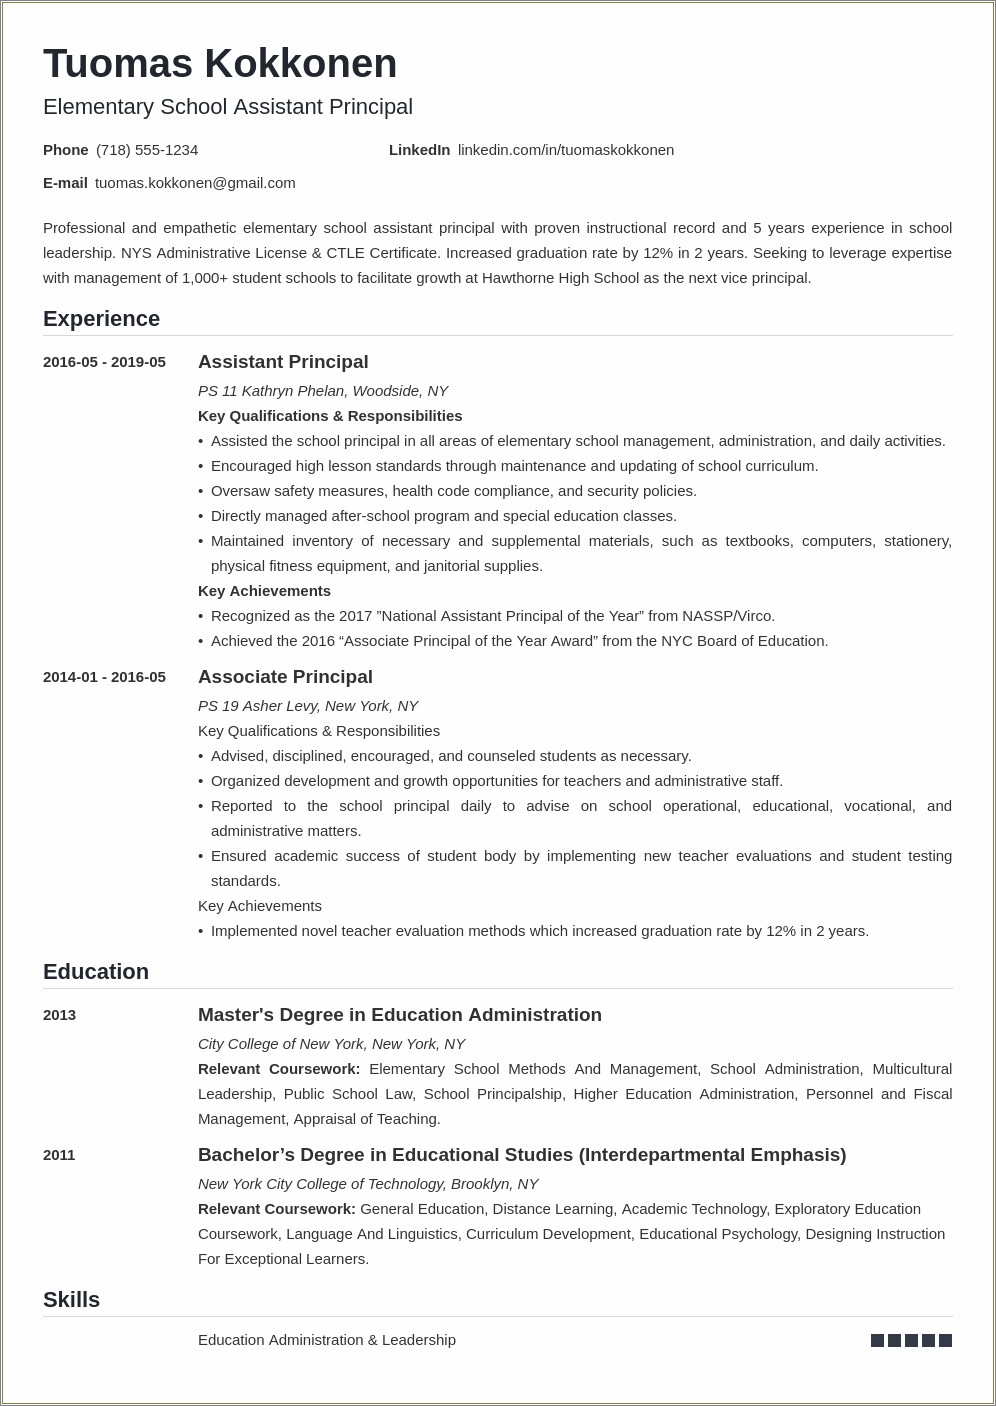 Sample Resume For The Post Of Principal